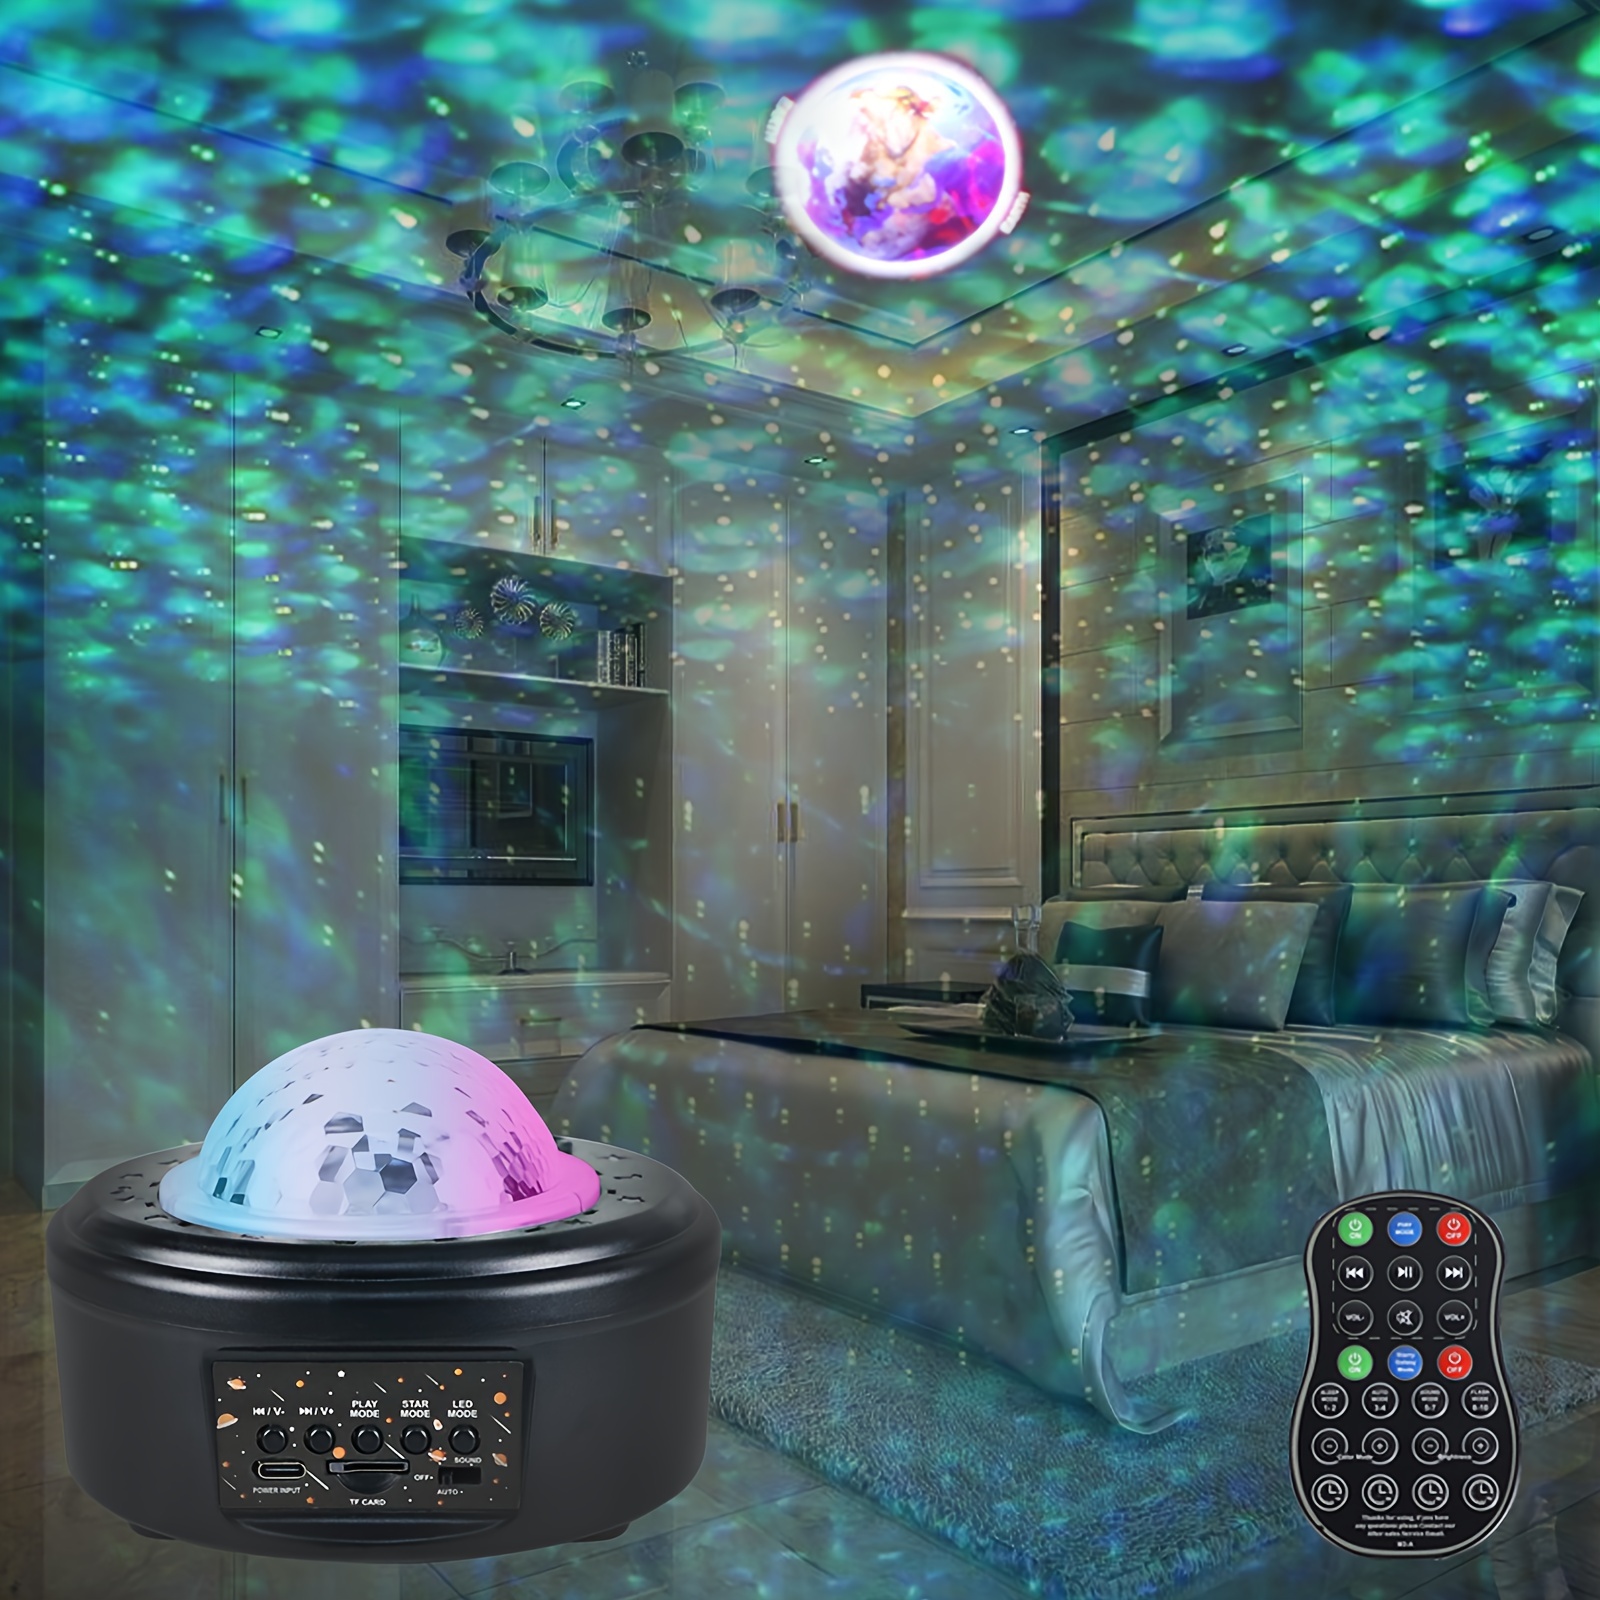 One Galaxy Projector, 8 White Noise Galaxy Lights for Bedroom, Music  Bluetooth Kids Night Light Projector, Led Projector Lights for Bedroom Room  Decor Ceiling Timer Sensory Adults Teen Gift 